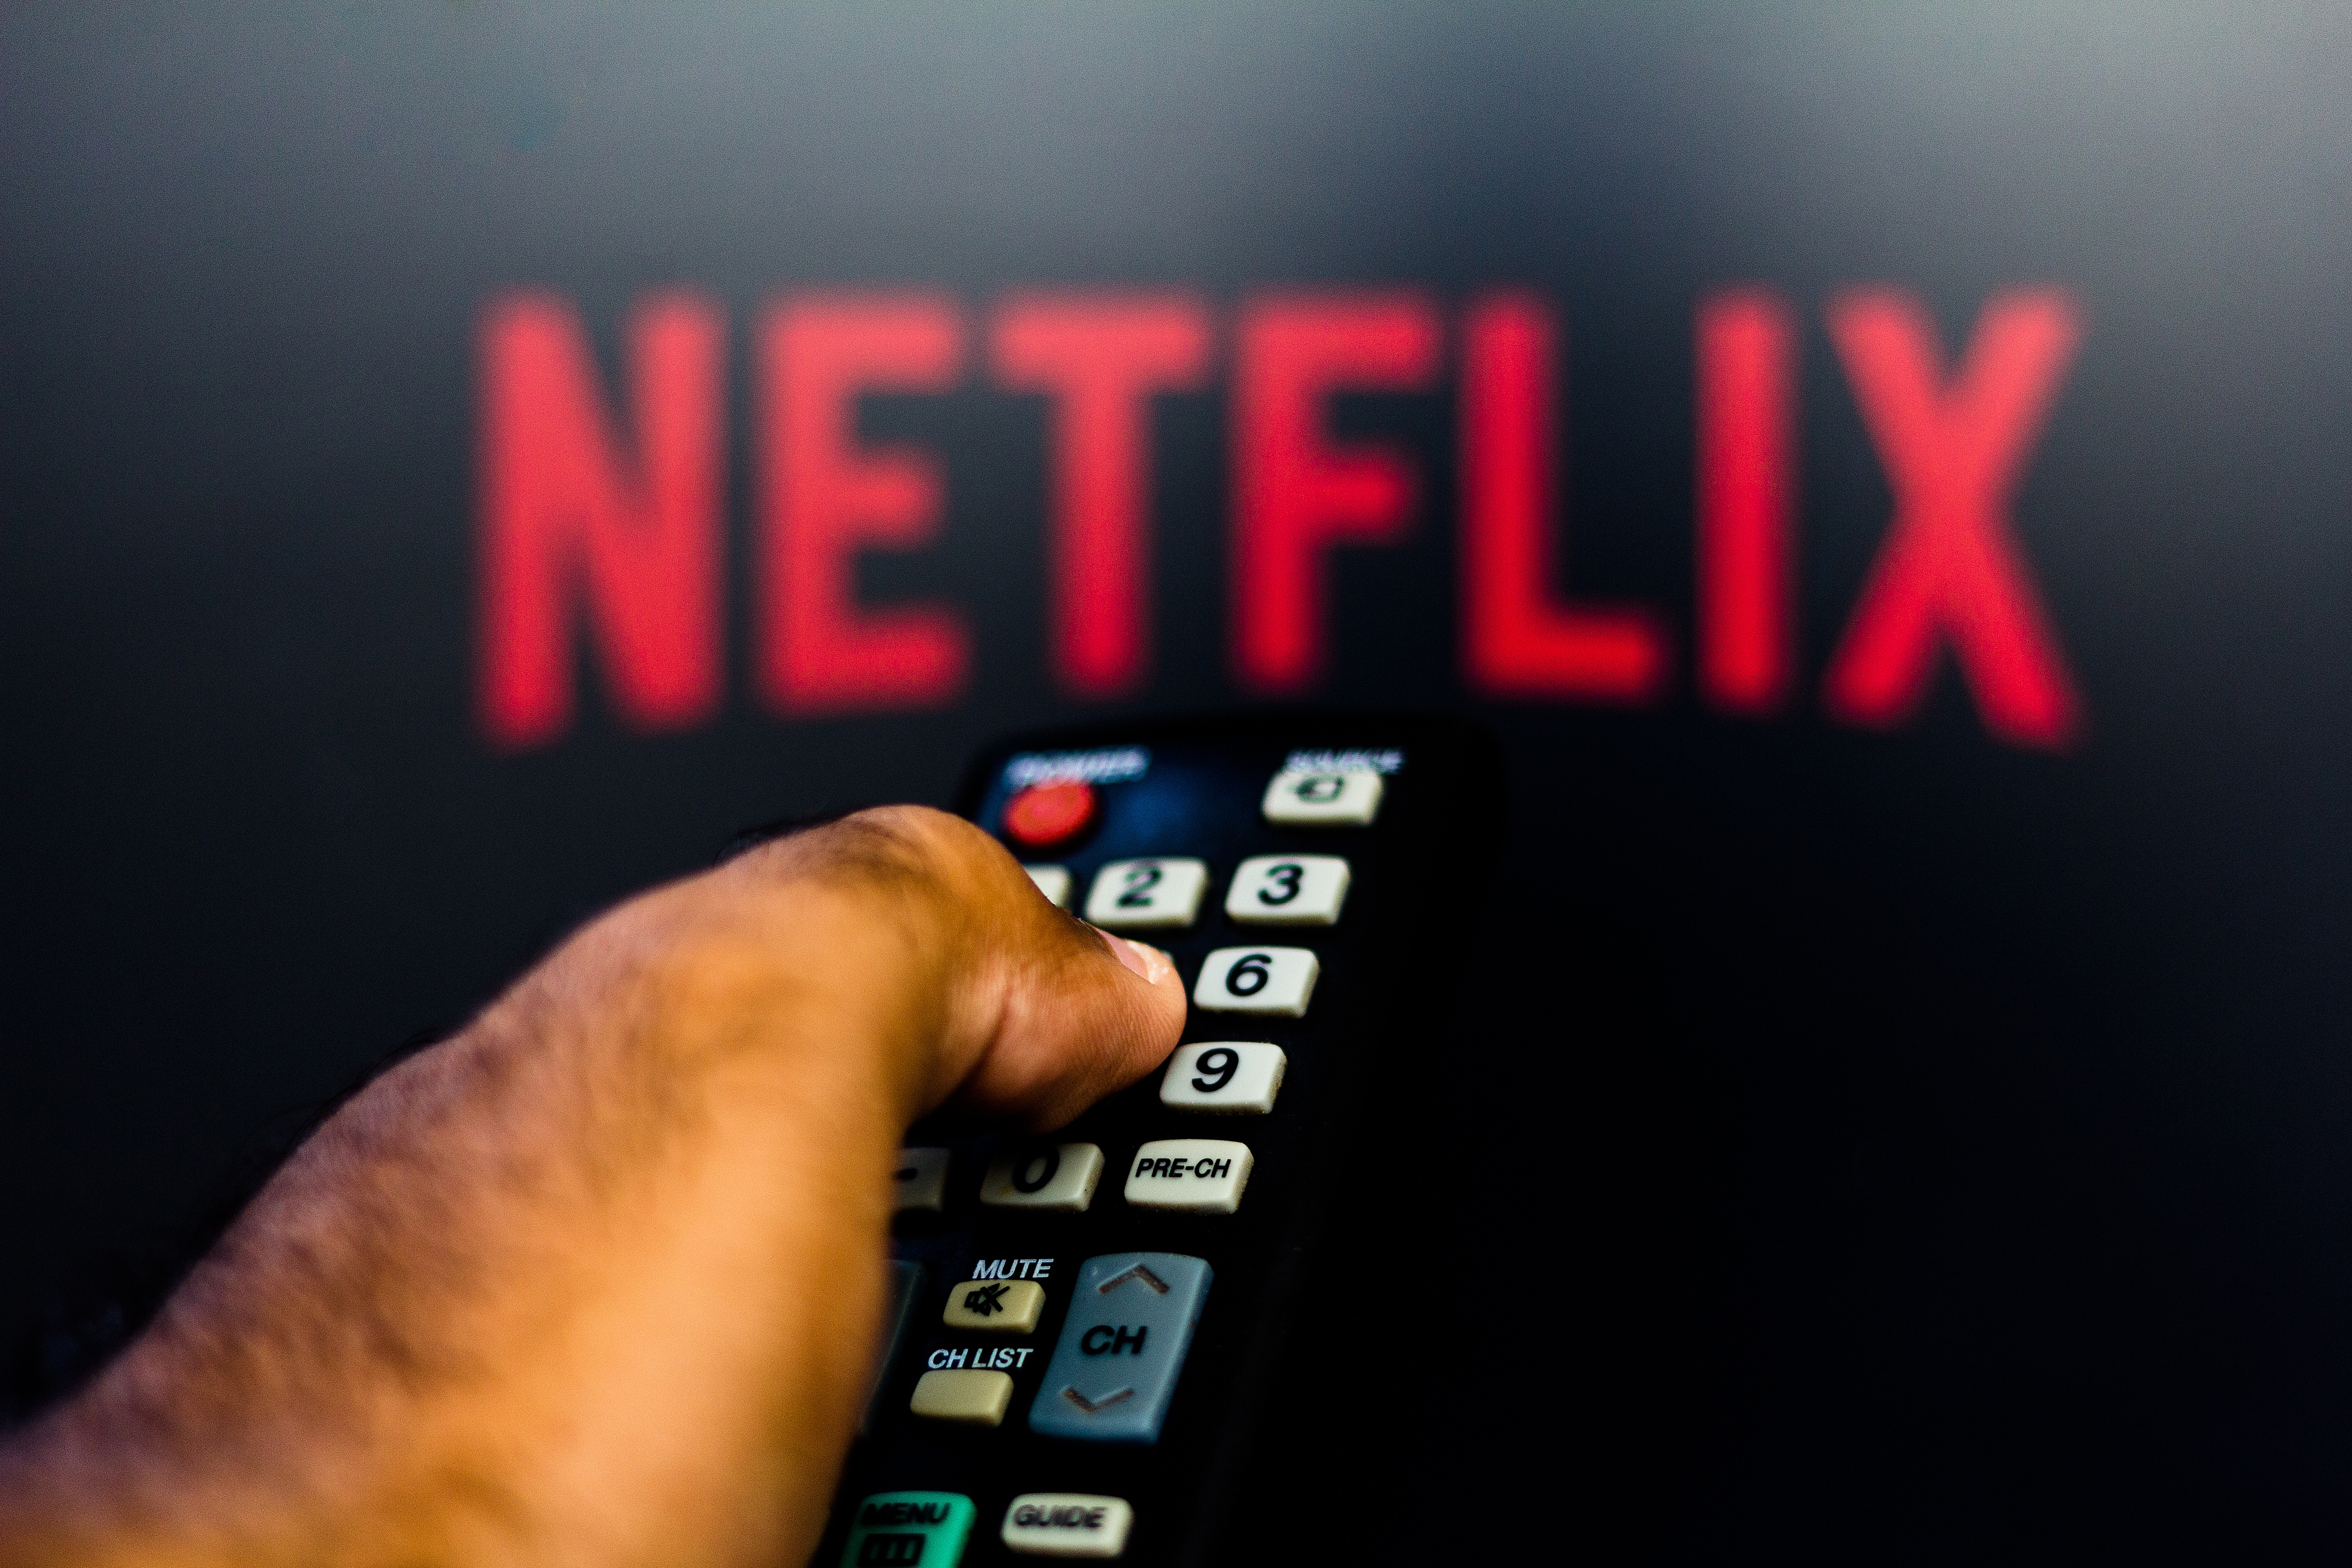 Netflix’s AV1 Streaming Codec Rolls Out To Certain Smart TVs, Streaming Devices & the PS4 Pro